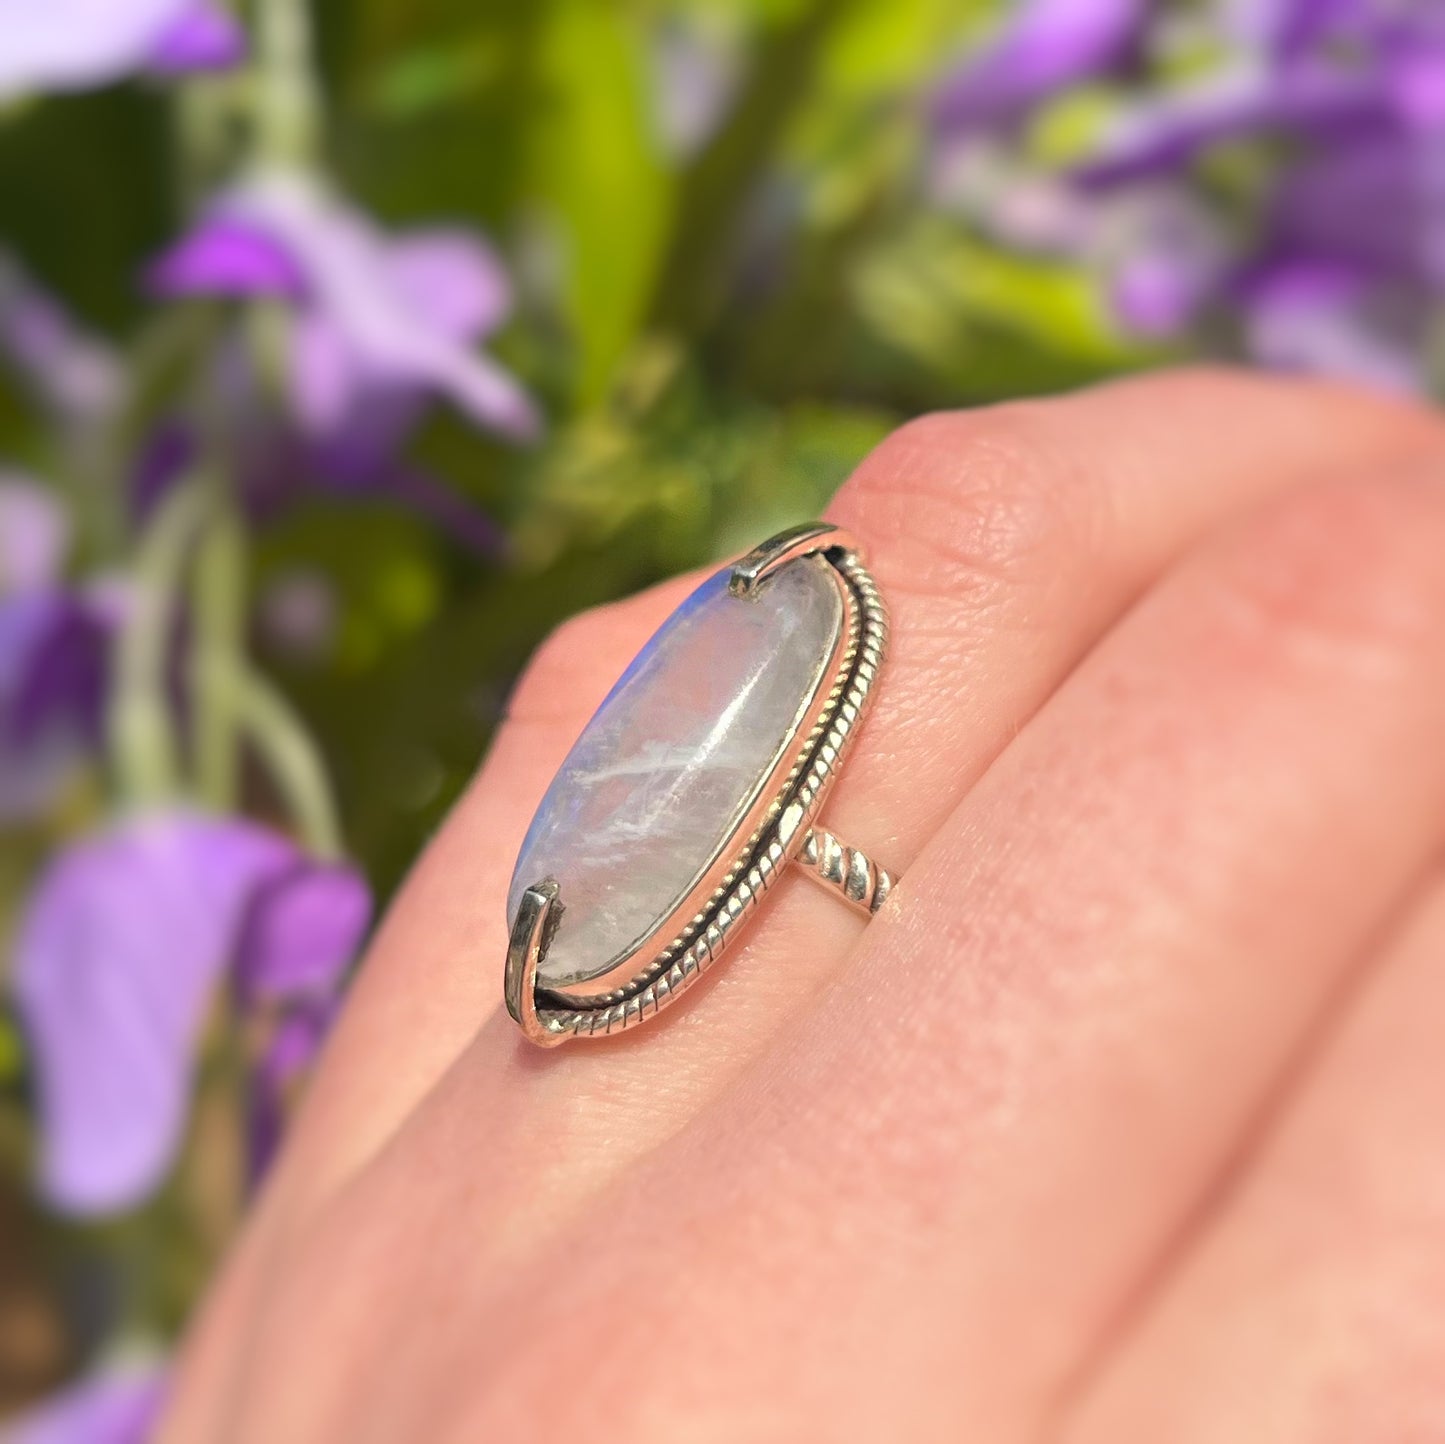 Sterling Silver Statement Rainbow Moonstone Ring - Size L